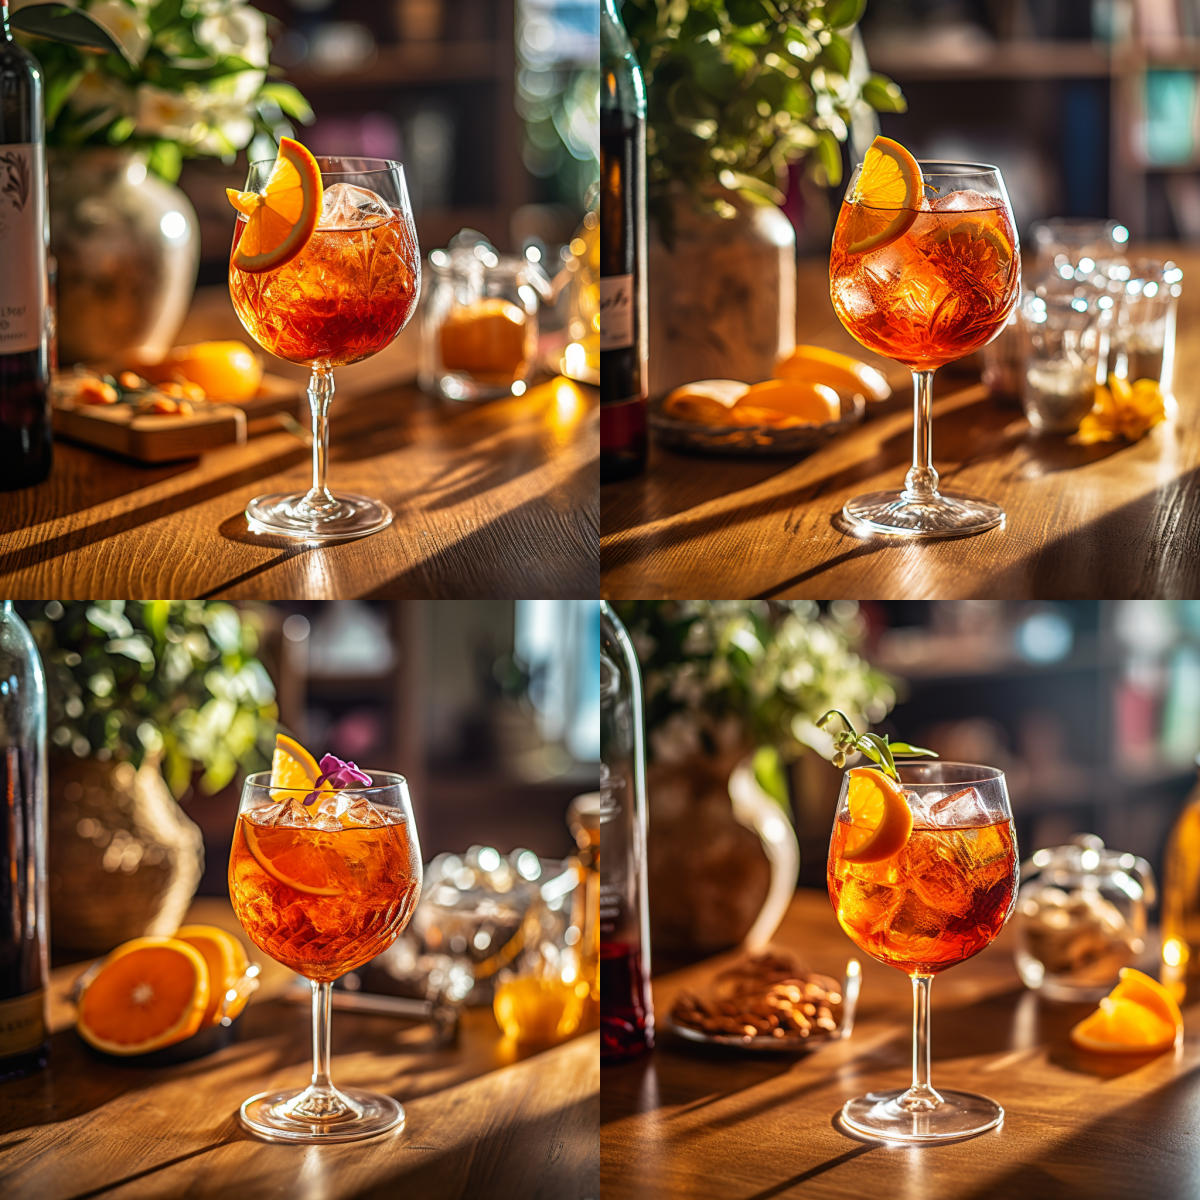 Senwater_Aperol_spritz_on_a_table_refreshing_looking_wood_backg_93ccb9bf-f102-43f8-8ee6-7458cb4eb037